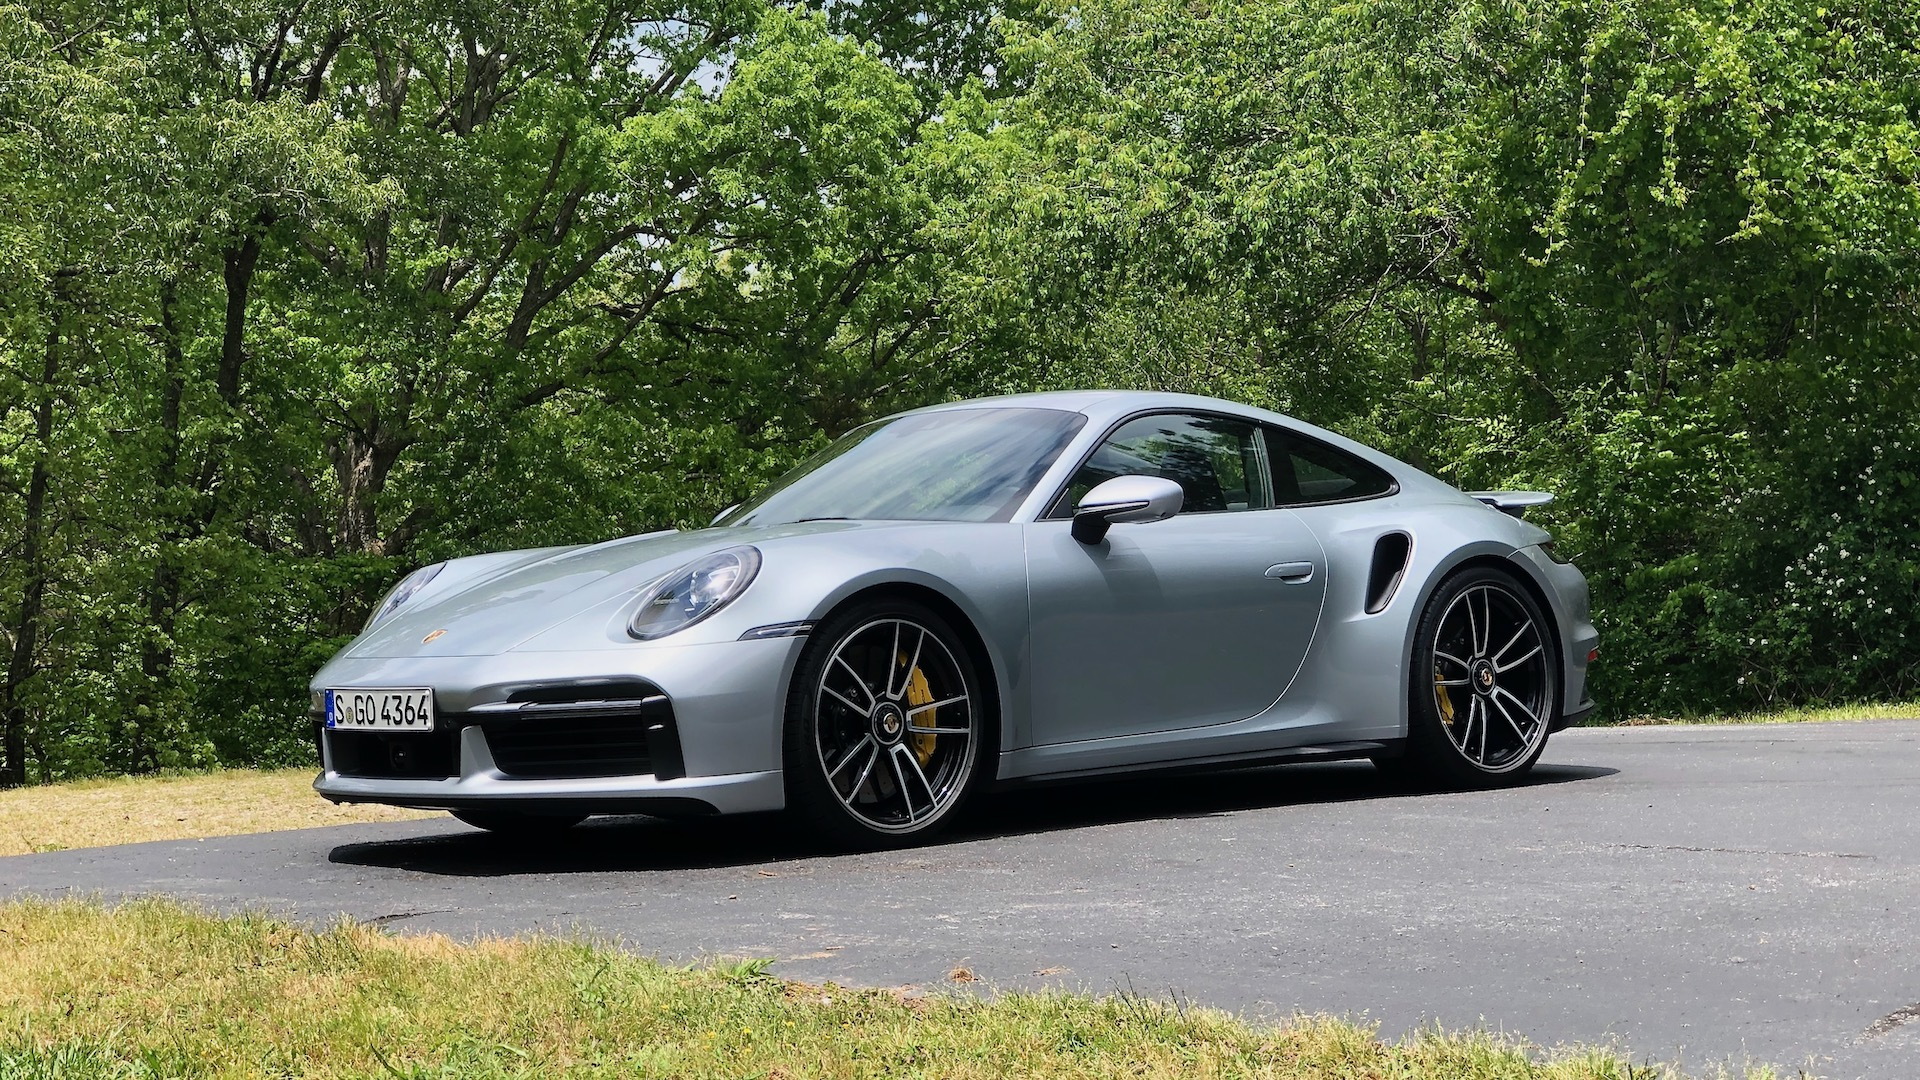 First Drive Review The 21 Porsche 911 Turbo S Jolts Us With Megawatt Performance